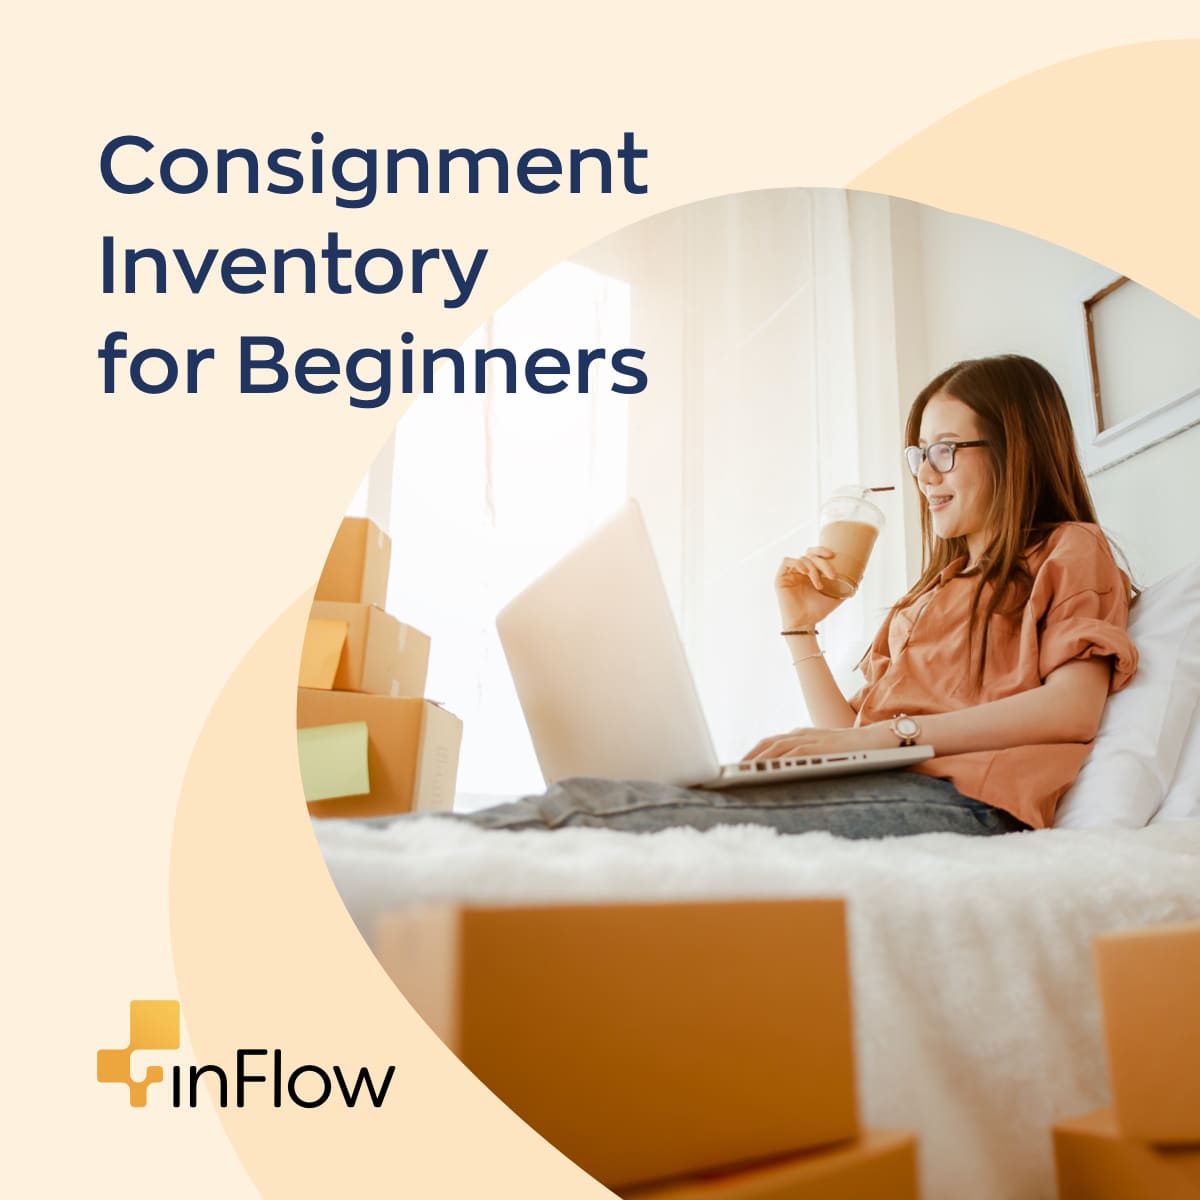 Consignment Inventory for Beginners: What It Is & How to Start